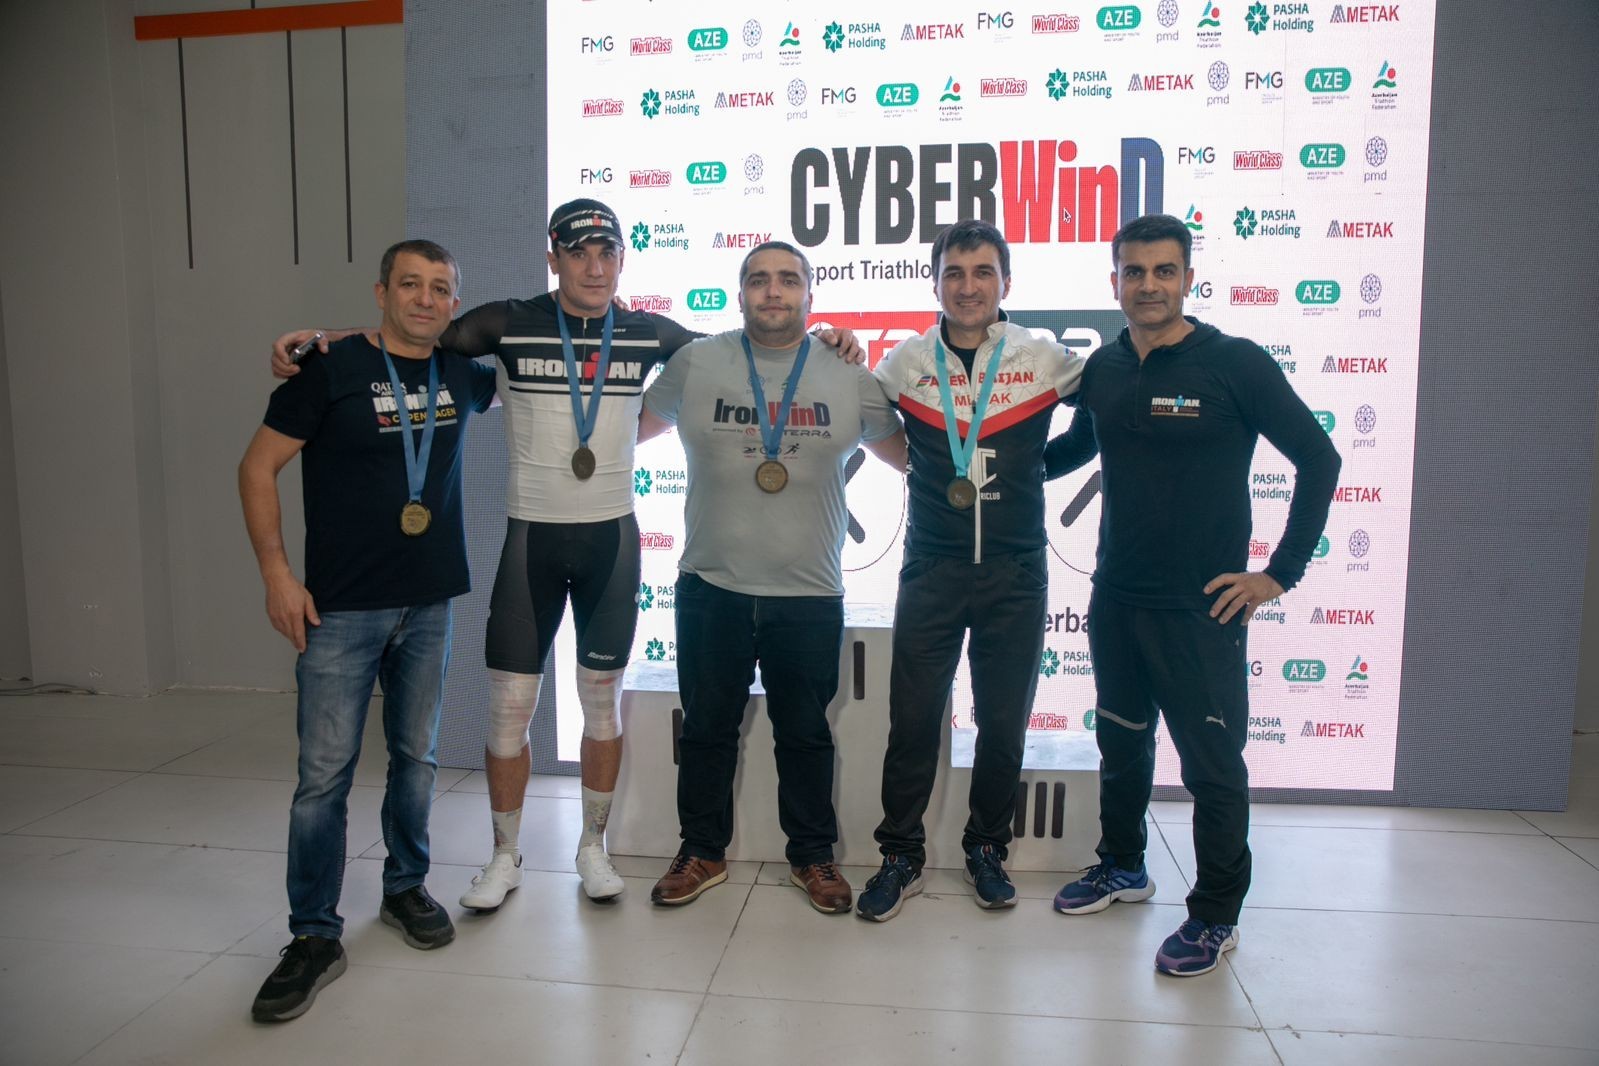 Cyber triathlon competition was held in Baku for the first time - PHOTO